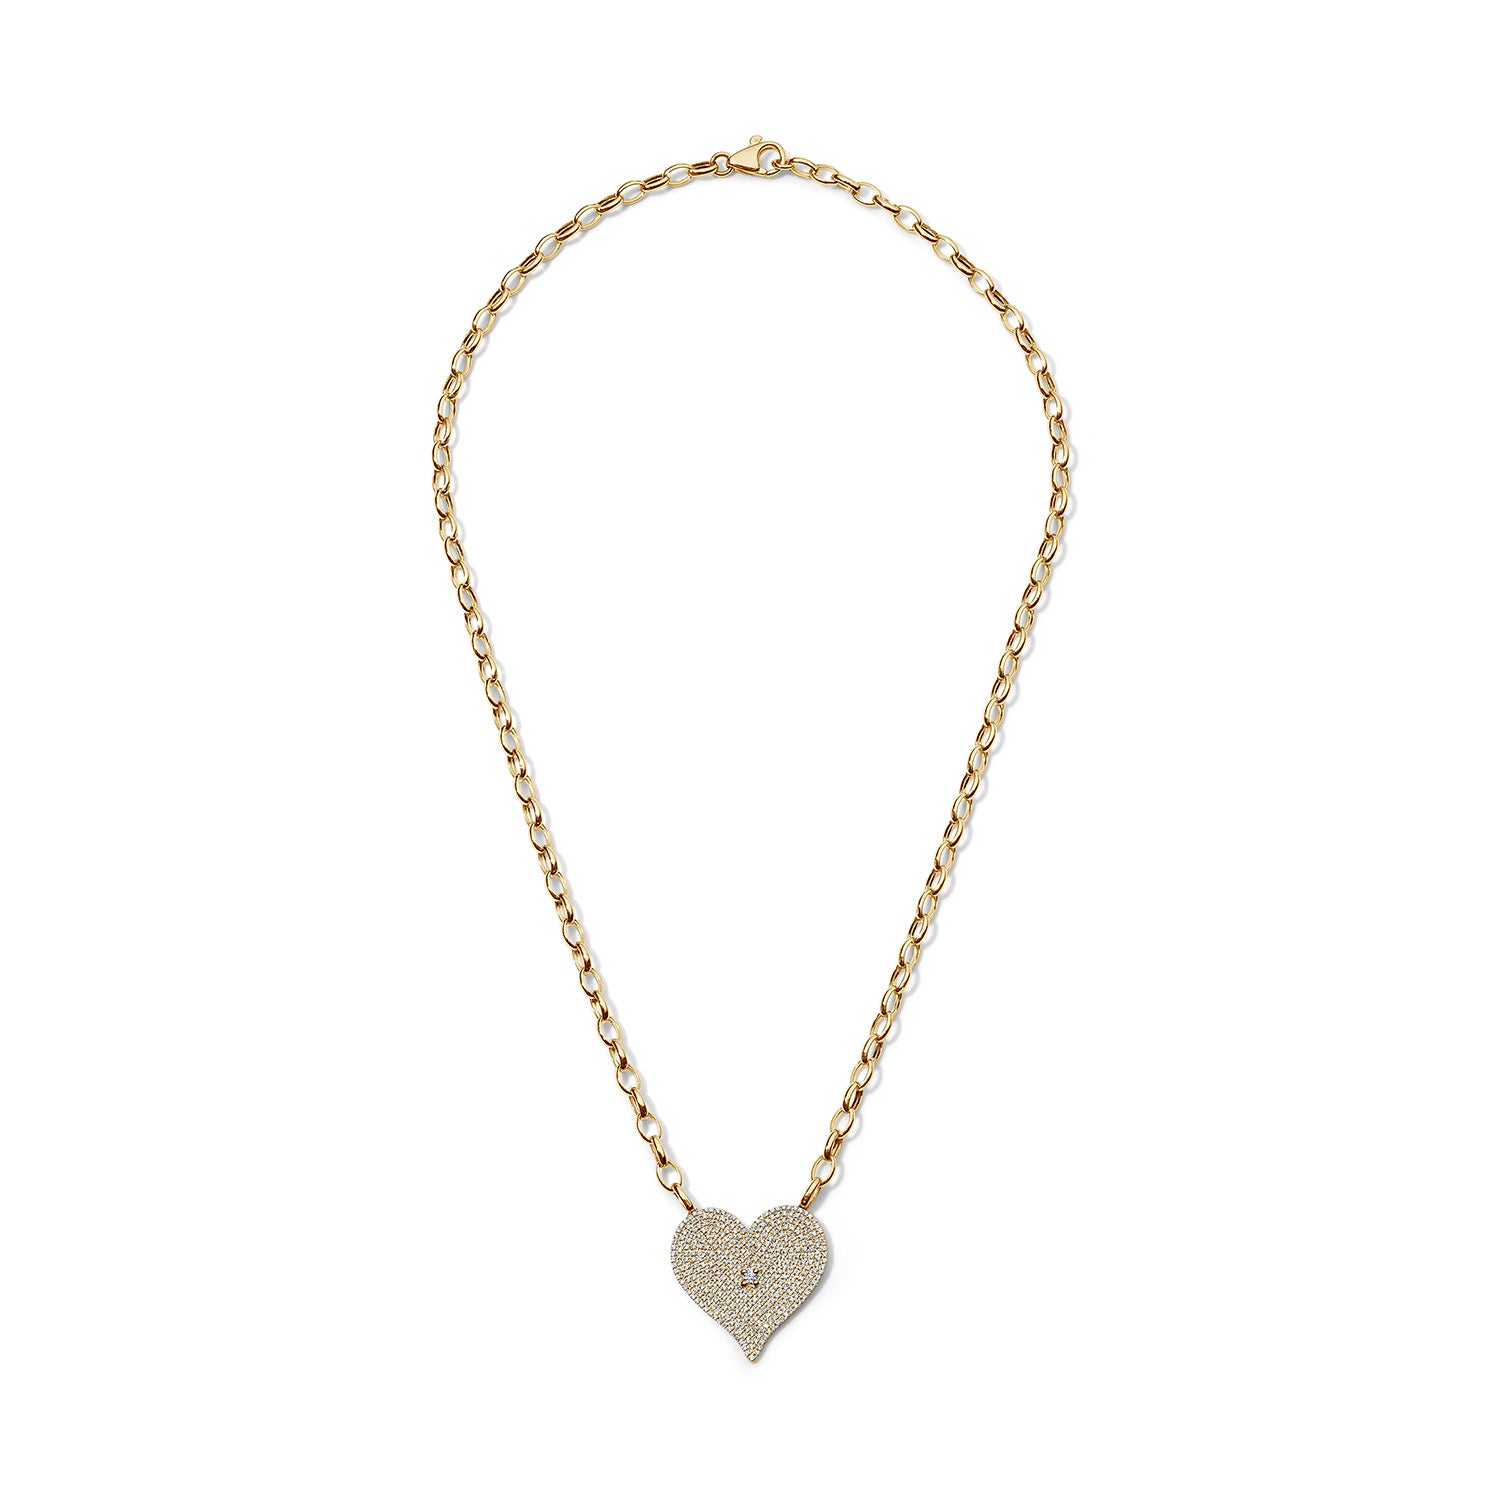 Heartfelt Gold and Diamond Heart with Oval Chain Necklace